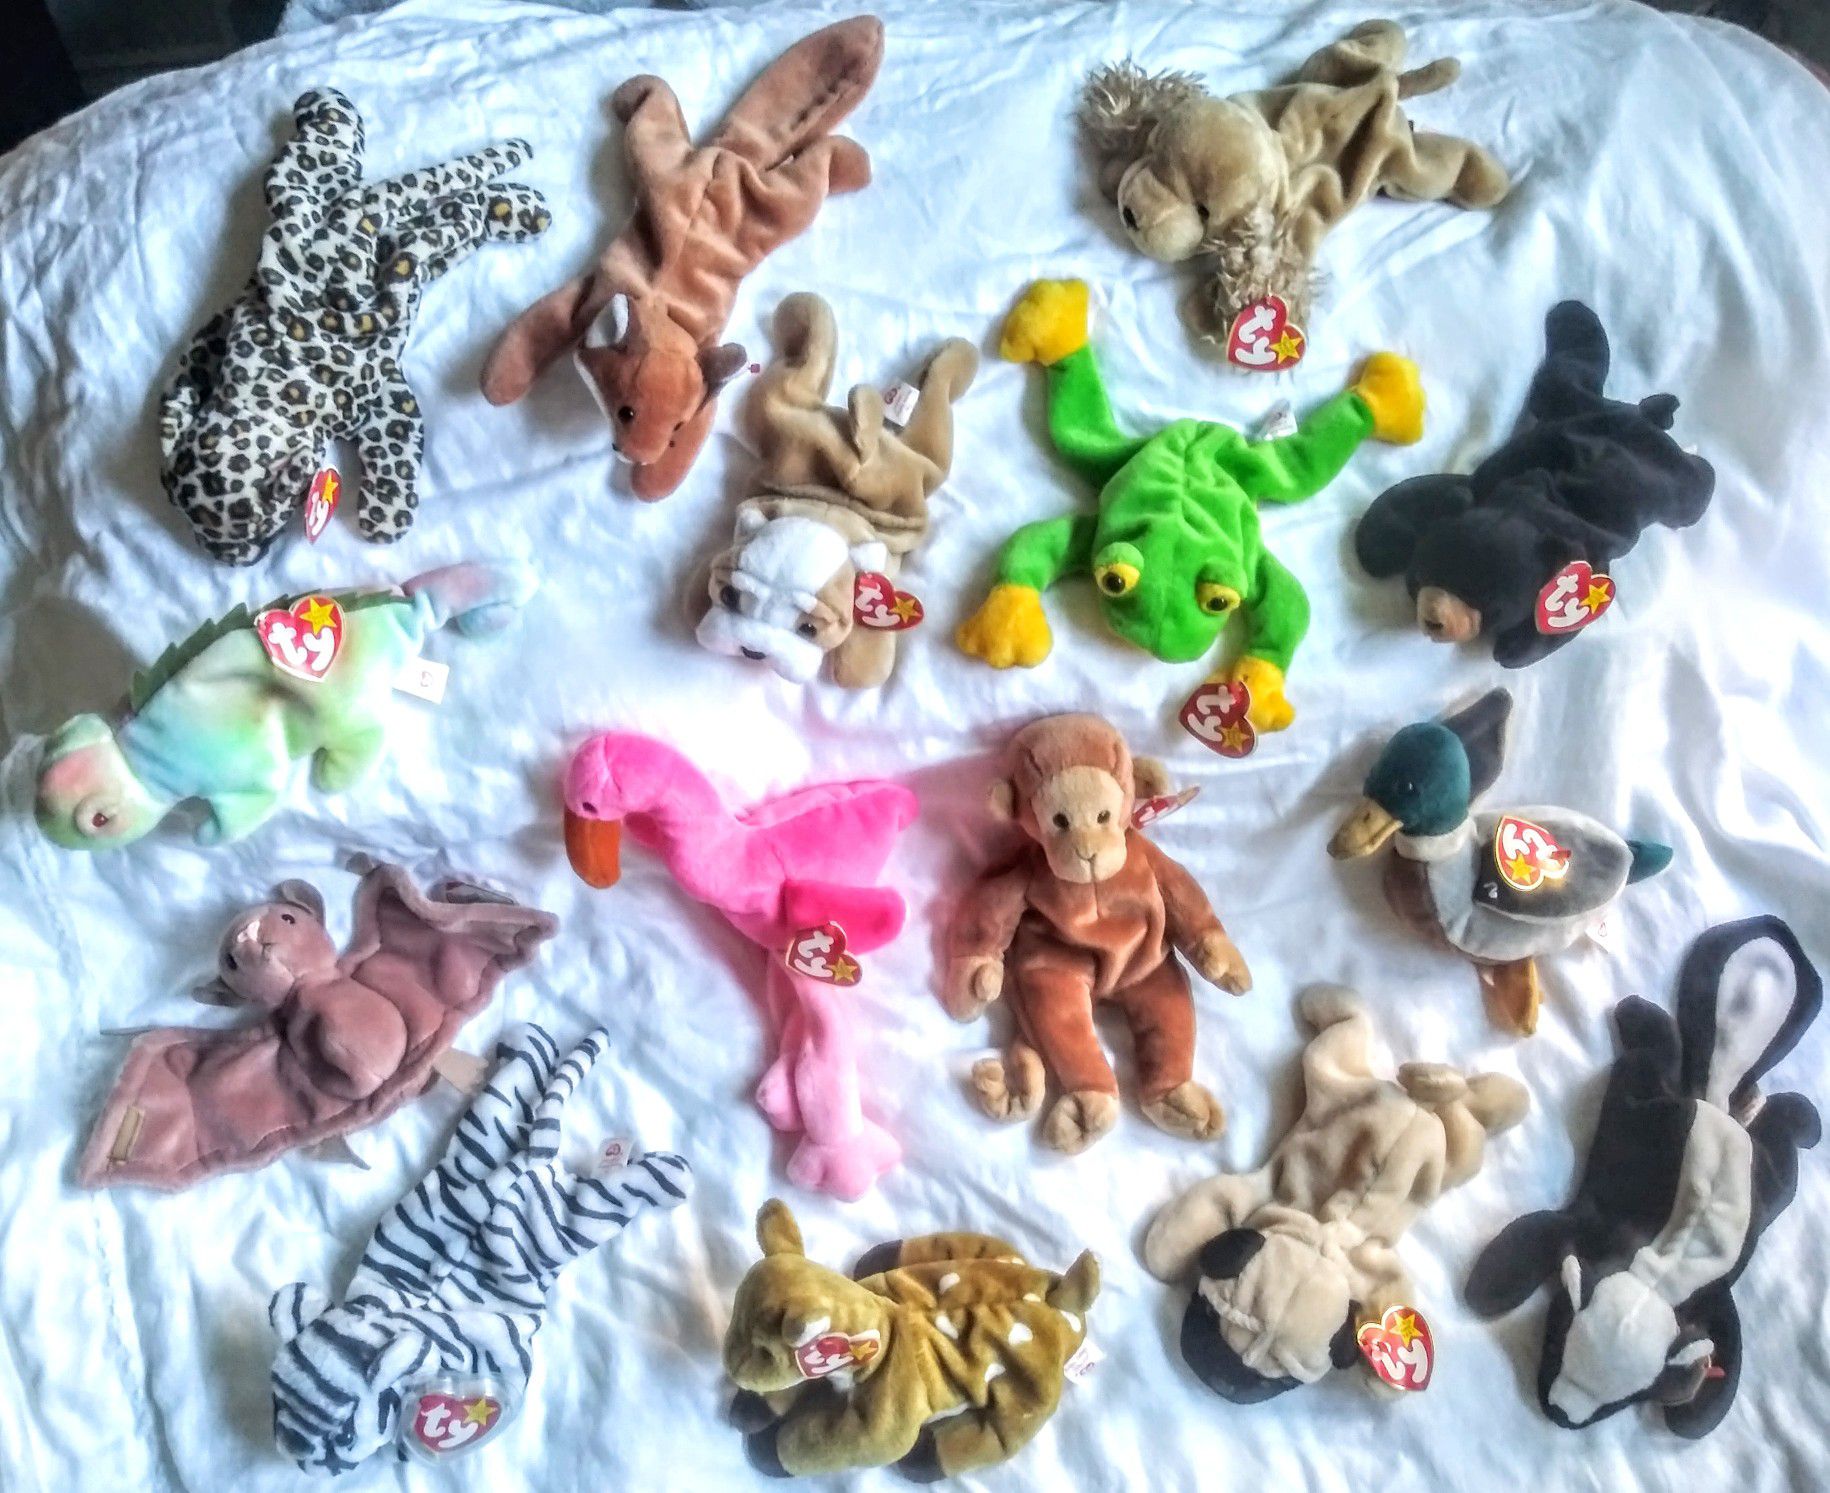 15 QUALITY / RARE BEANIE BABIES w/ SOME TAG ERRORS - GREAT SHAPE